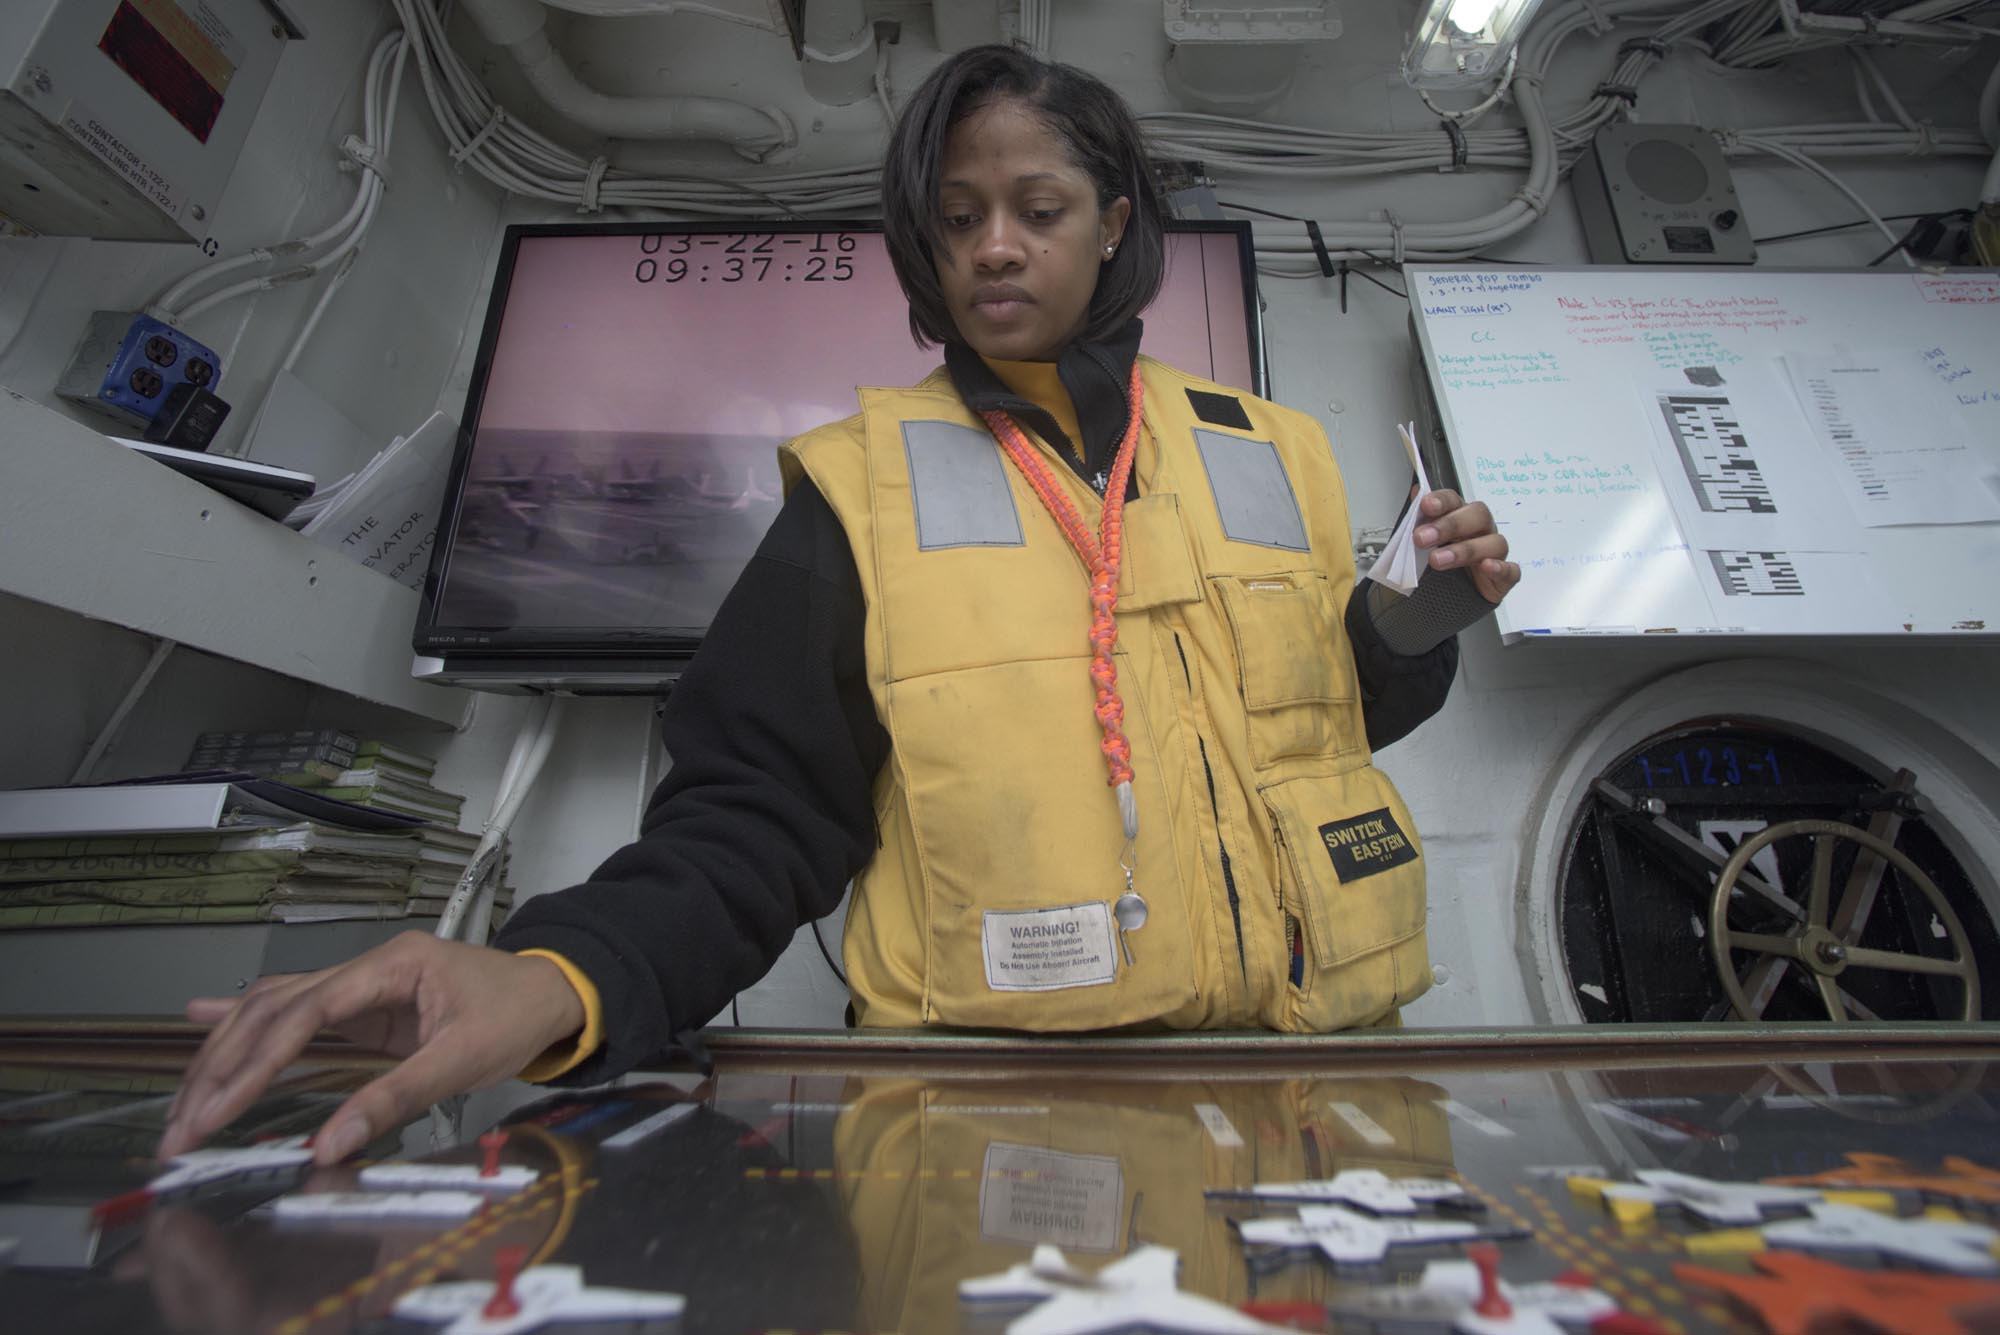 160322-N-KK394-052ATLANTIC OCEAN (March 22, 2016) - Aviation Boatswain's Mate (Handling) 2nd Class Kira Edgehill mans the hangar deck control Ouija board aboard the aircraft carrier USS Dwight D. Eisenhower (CVN 69), the flagship of the Eisenhower Carrier Strike Group. Ike is underway conducting a Composite Training Unit Exercise (COMPTUEX) with the Eisenhower Carrier Strike Group in preparation for a future deployment. (U.S. Navy photo by Mass Communication Specialist 3rd Class Anderson W. Branch/Released)d)